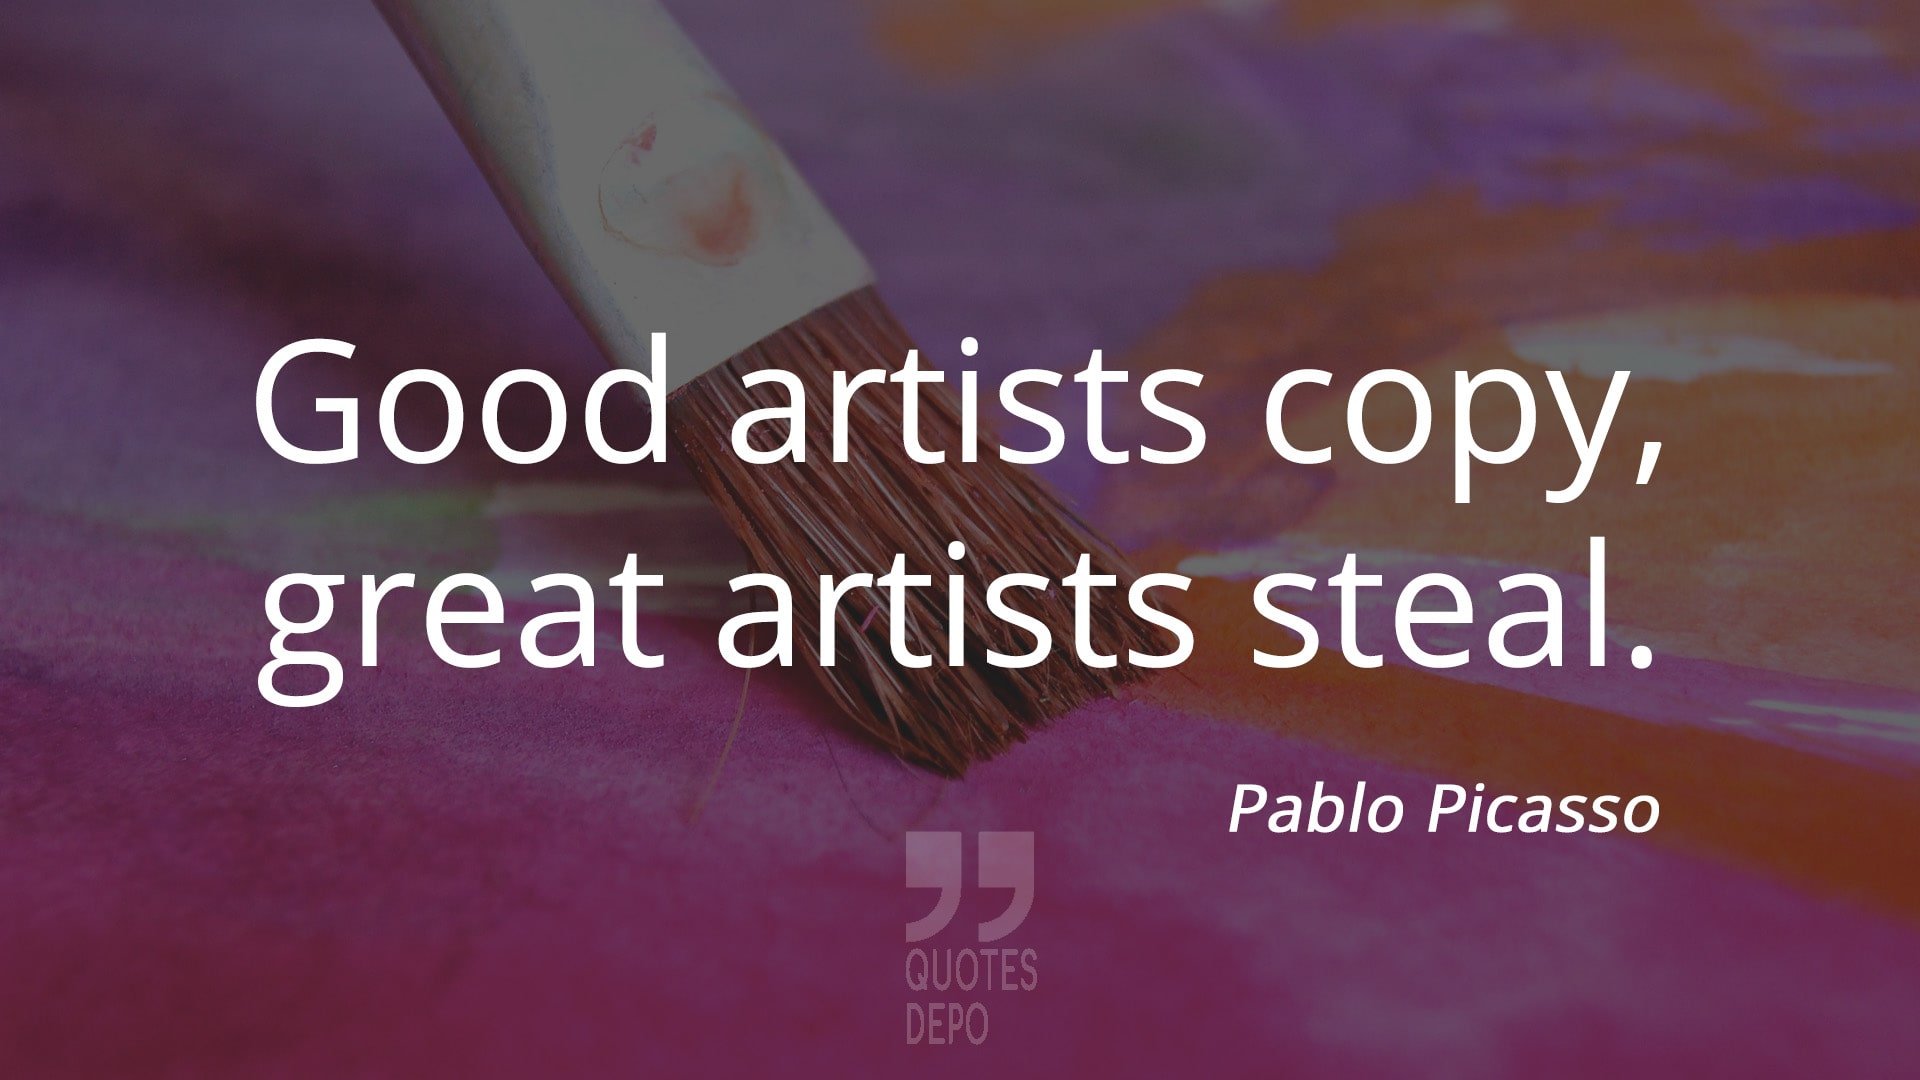 good artists copy great artists steal - pablo picasso quotes